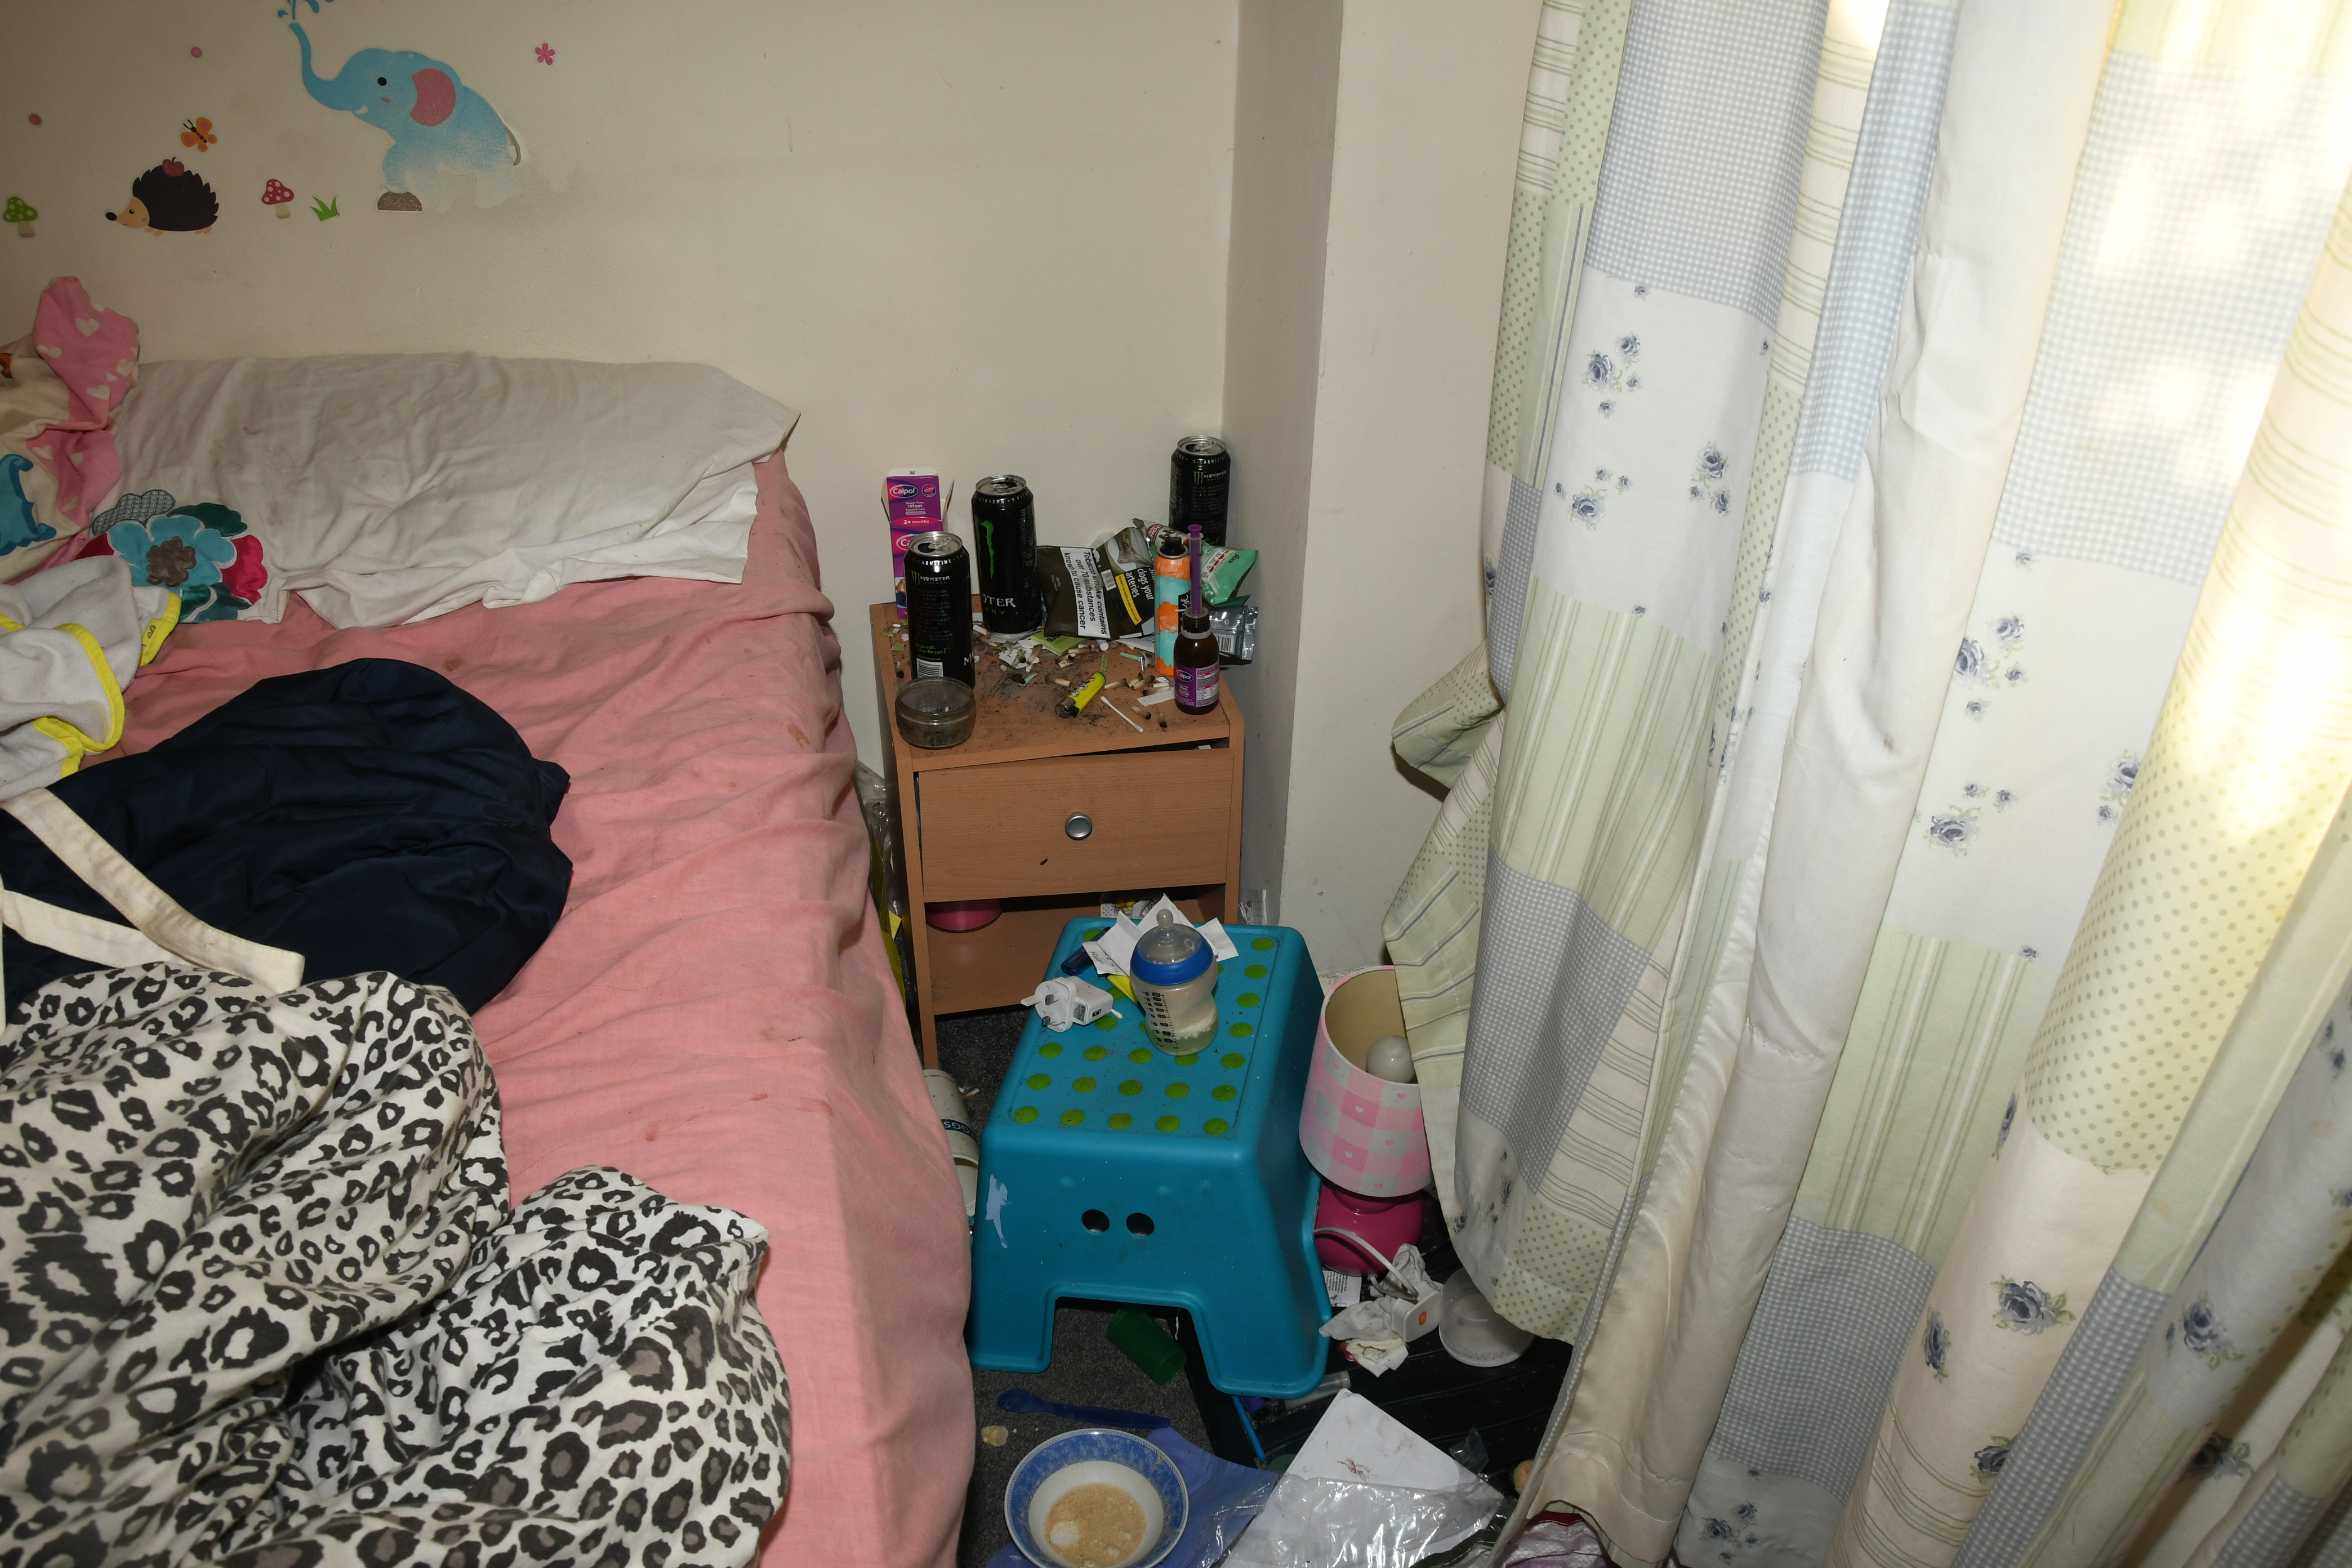 The house where Finley lived was found to be in a state of squalor, with off milk and cannabis seen in this bedroom (Derbyshire Police/PA)